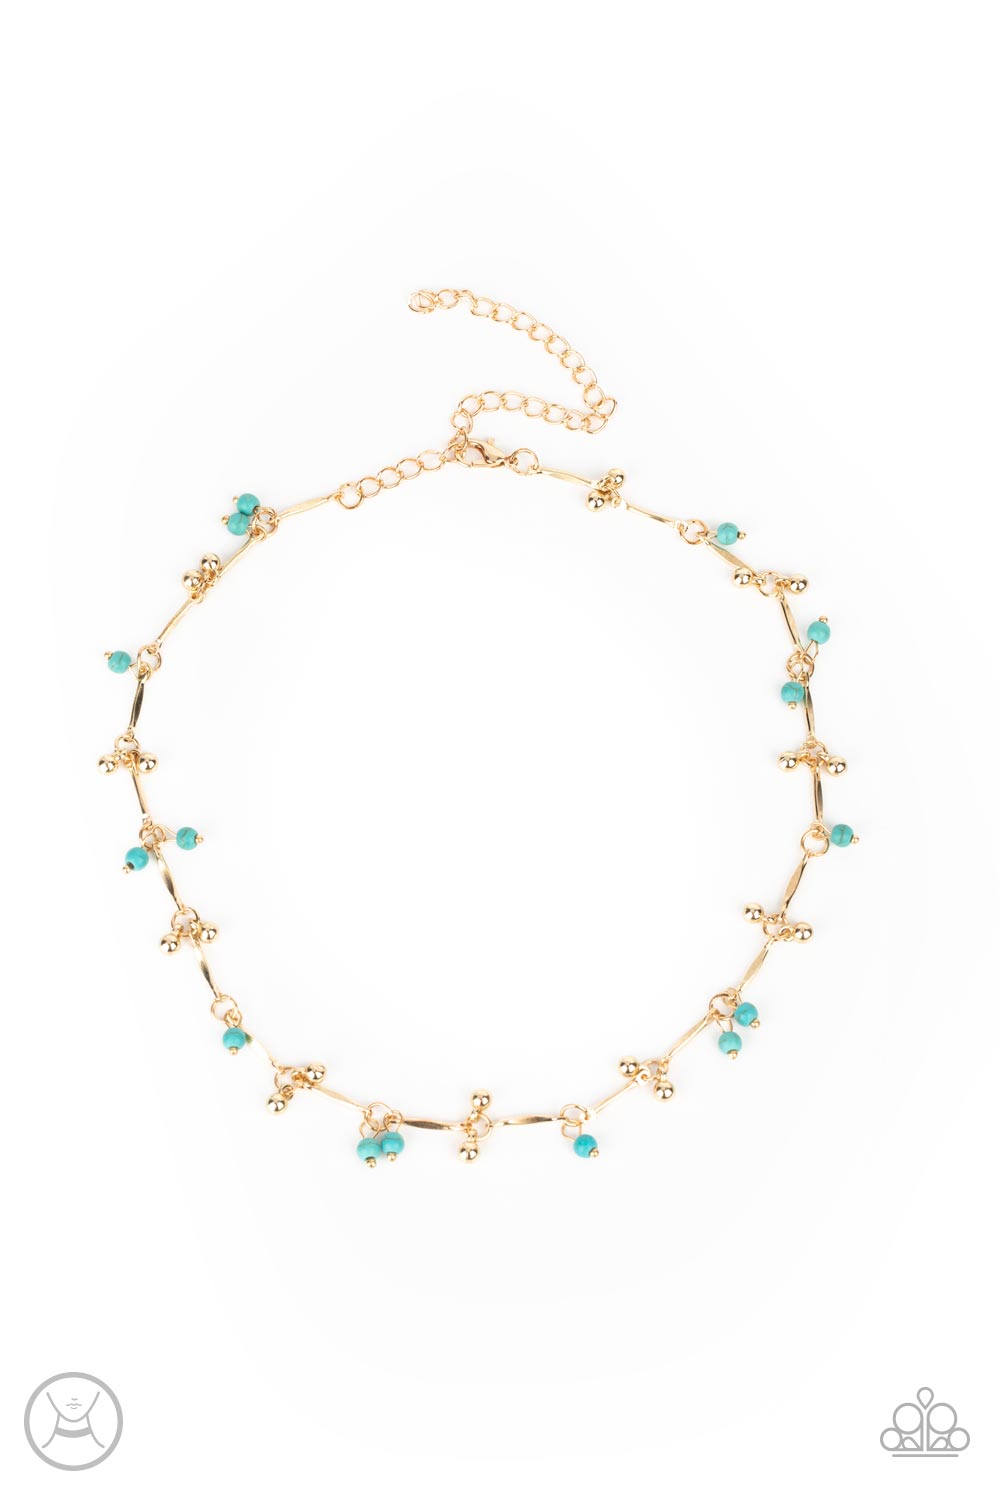 Sahara Social Gold and Turquoise Choker Necklace - Paparazzi Accessories- lightbox - CarasShop.com - $5 Jewelry by Cara Jewels